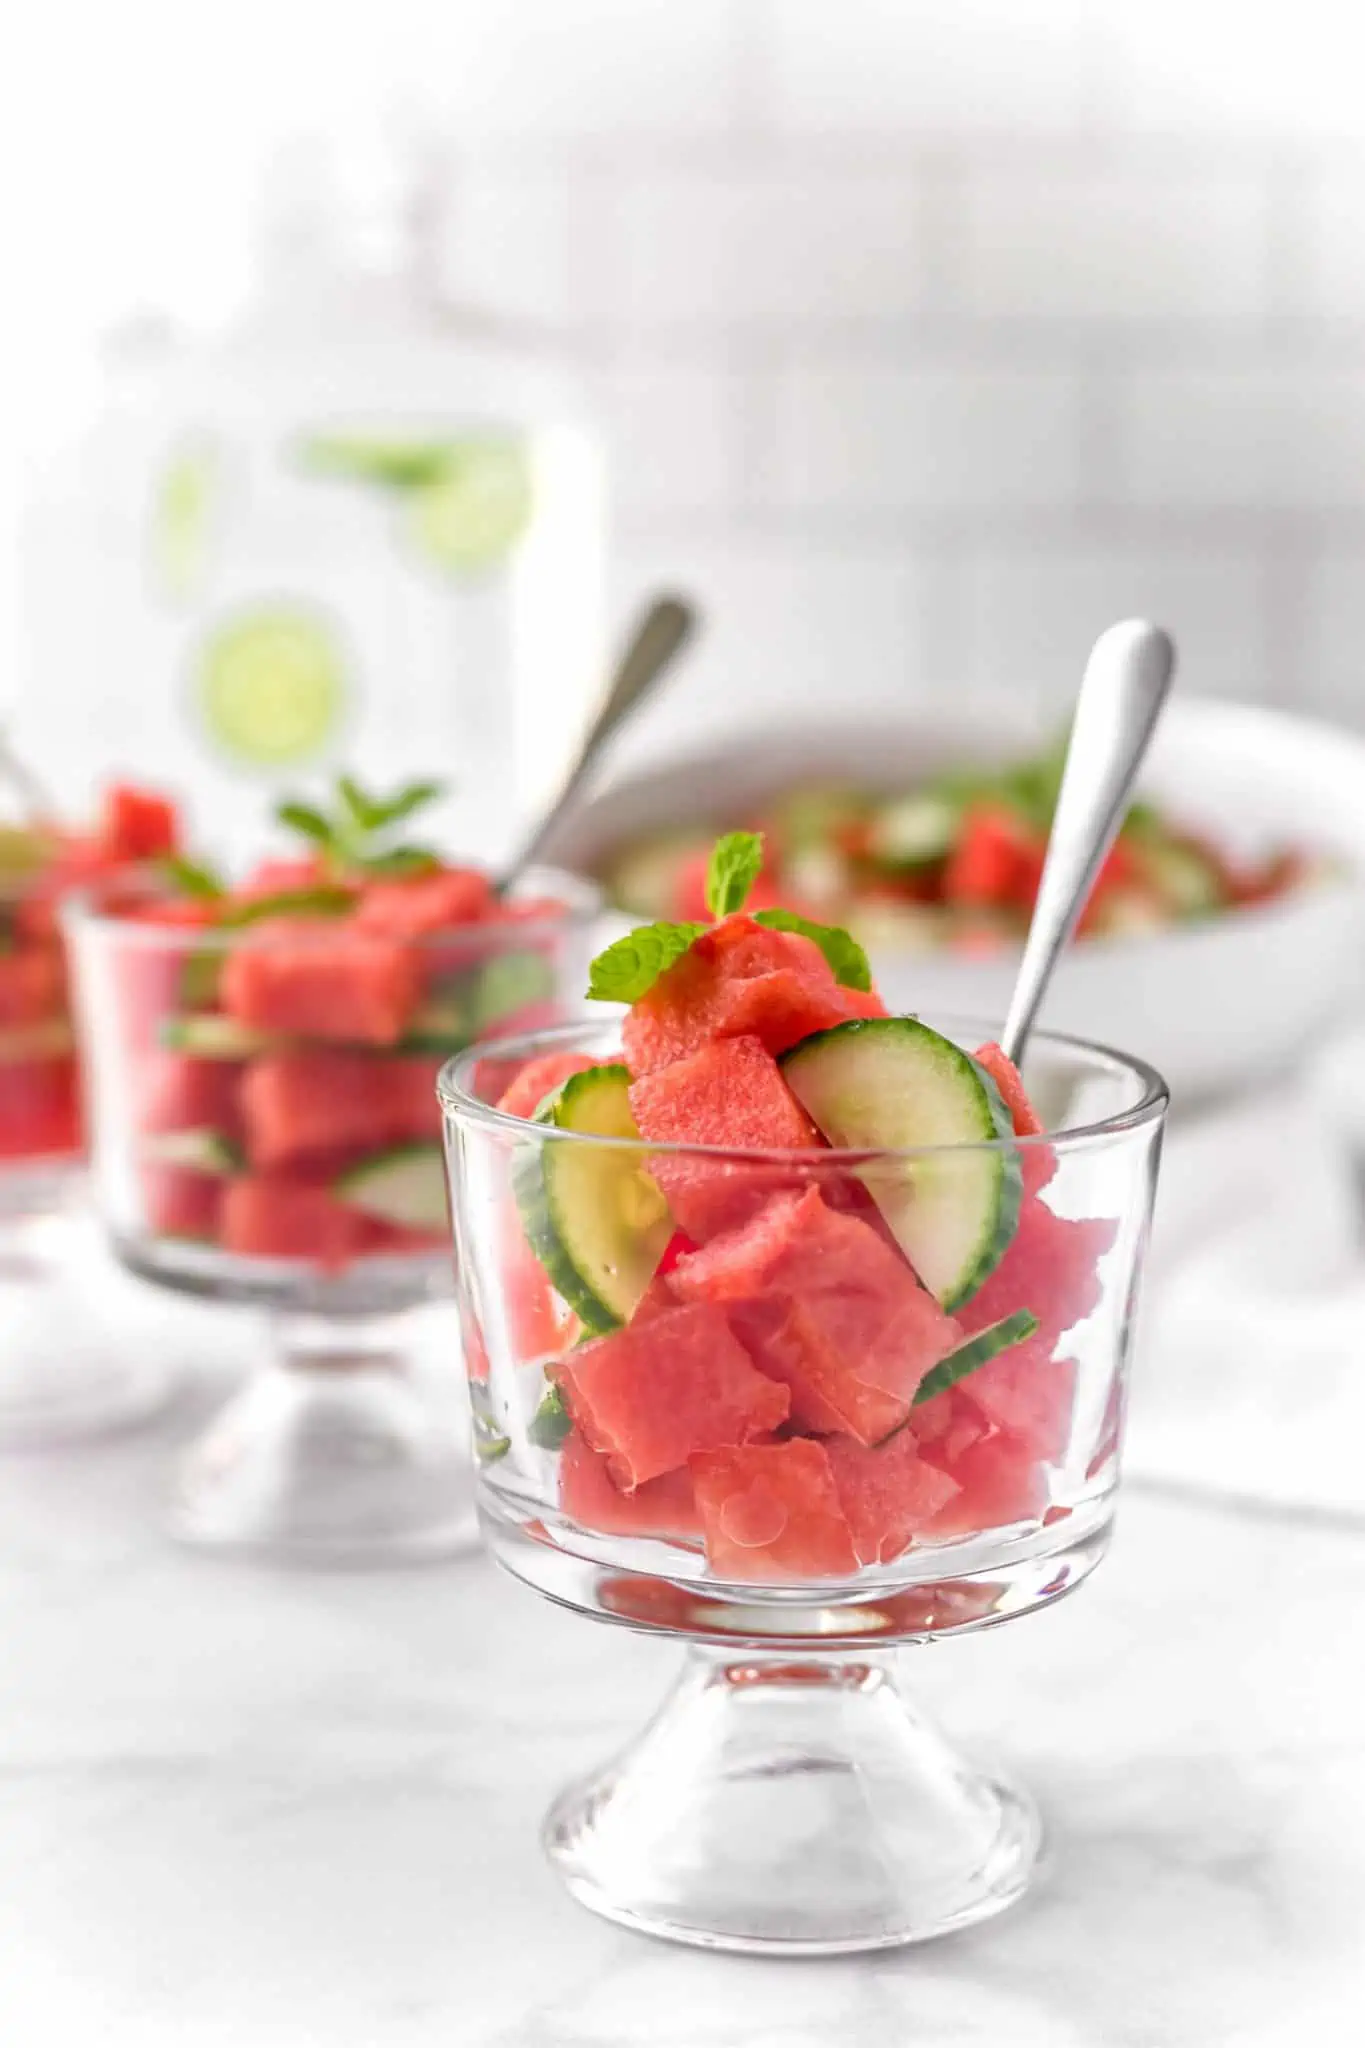 Watermelon Salad with Cucumber, Lime, and Agave Nectar Served in Summey Party Glasses